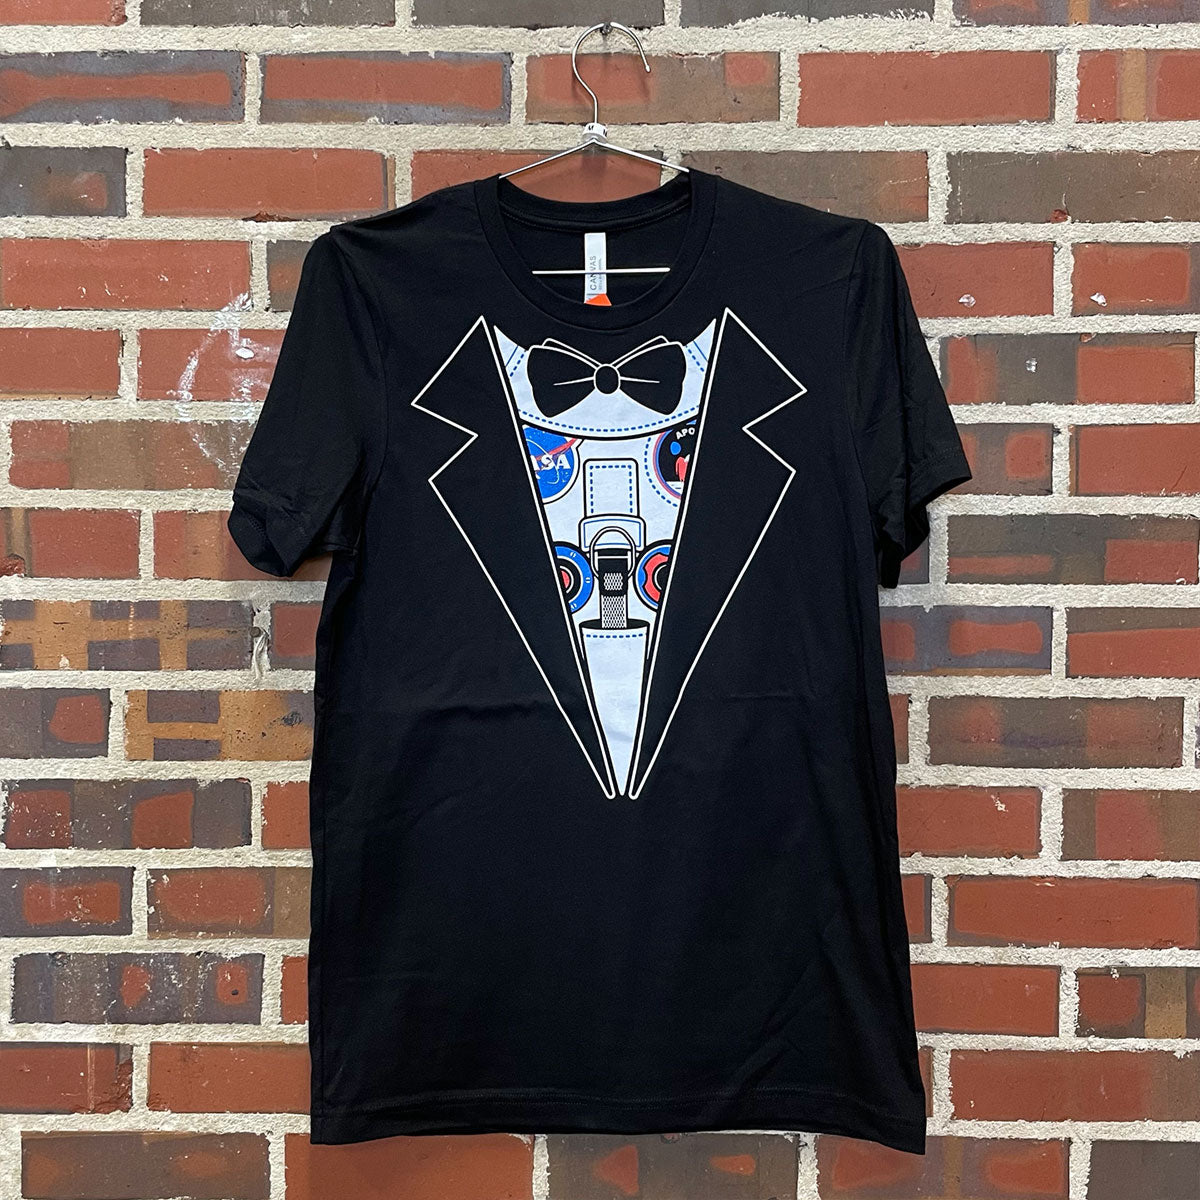 Faux Tuxedo Space suit design on a black t-shirt against a red brick wall